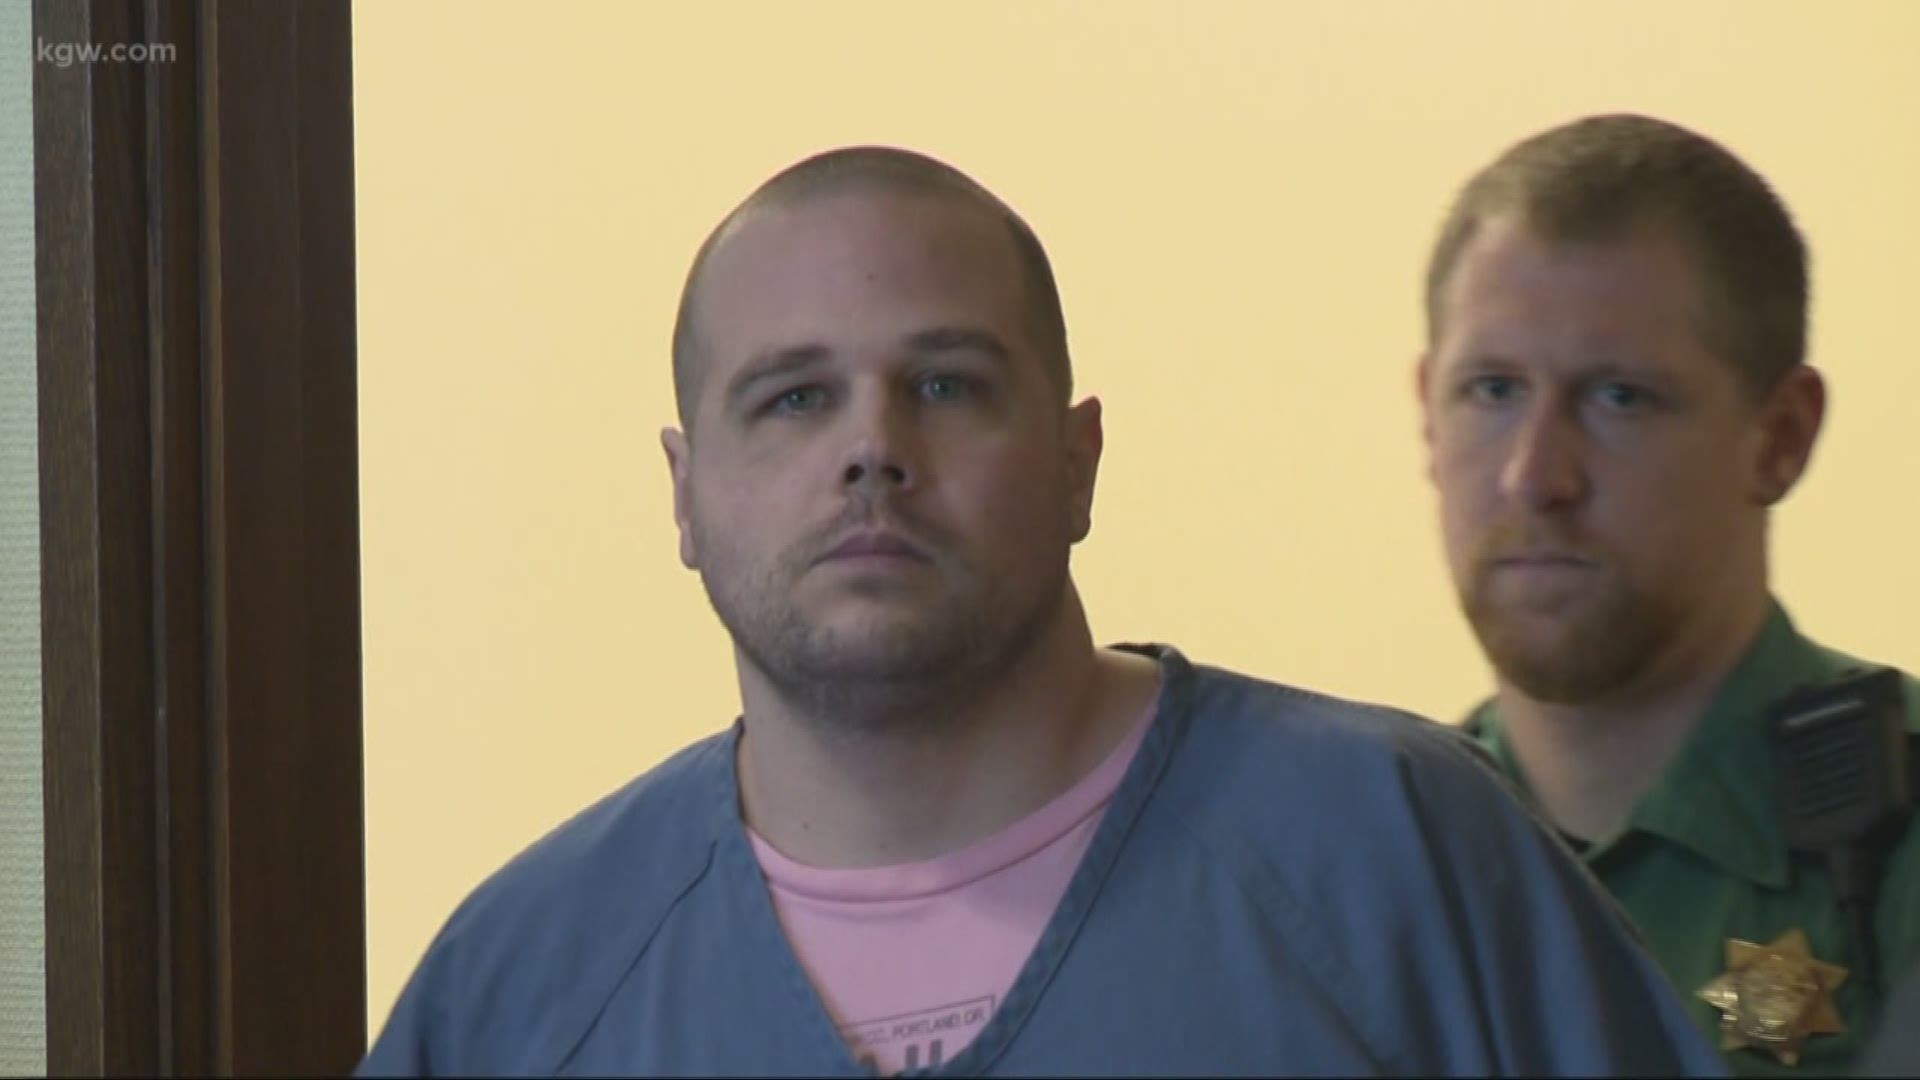 MAX stabbing suspect Jeremy Christian is accused of fighting and making racial slurs in jail.